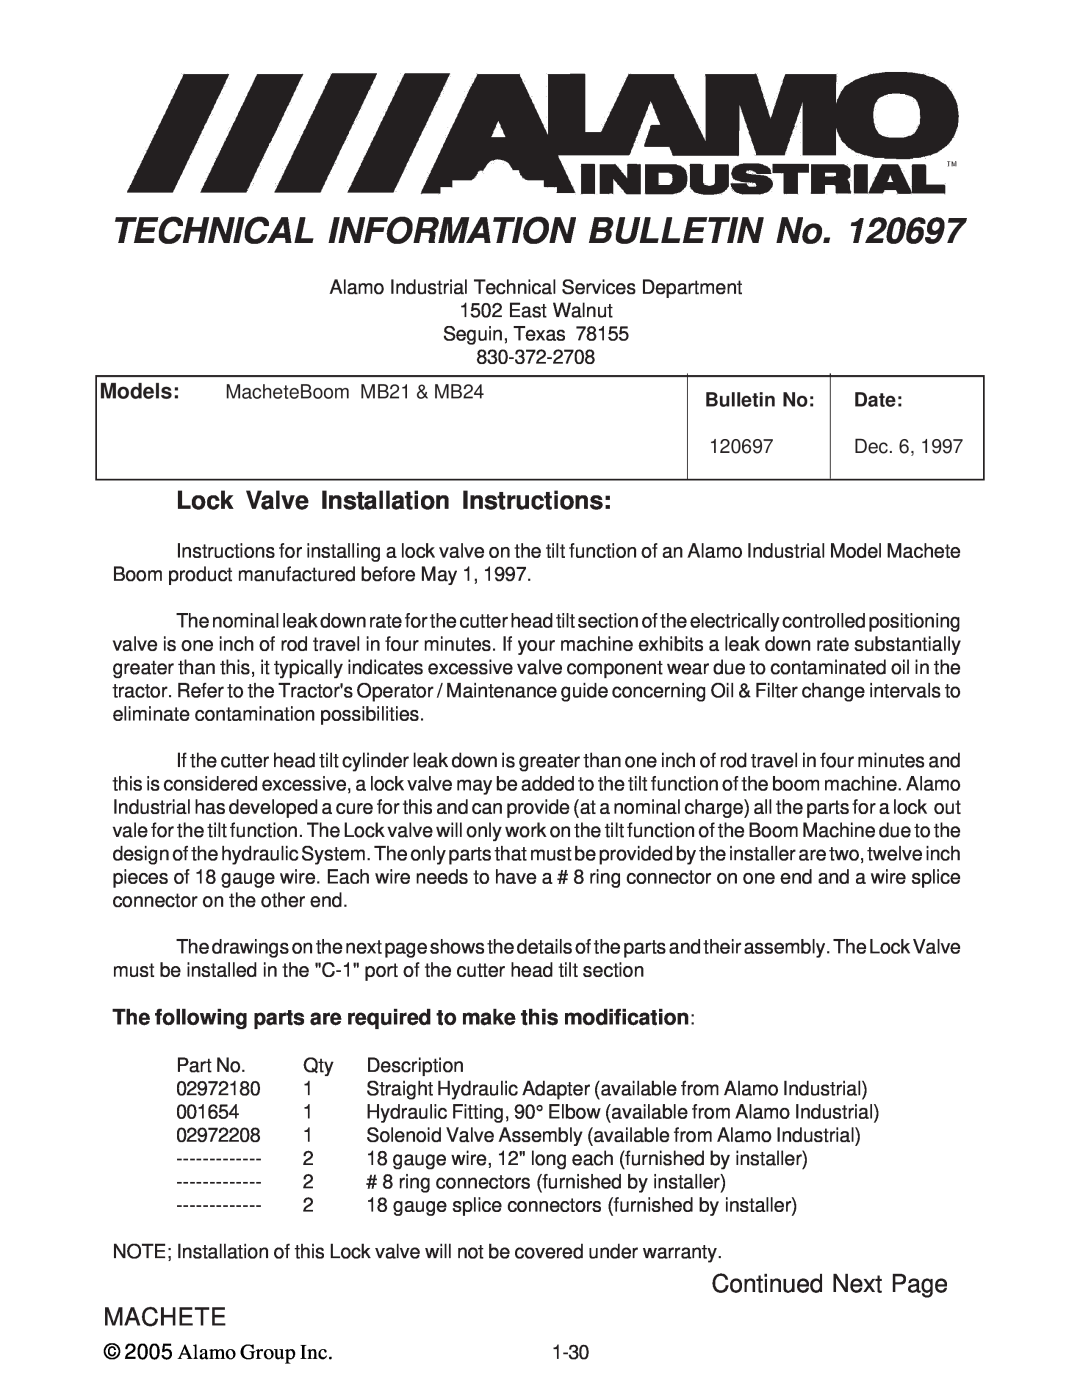 Alamo T 7740 Lock Valve Installation Instructions, TECHNICAL INFORMATION BULLETIN No, Continued Next Page MACHETE, Date 